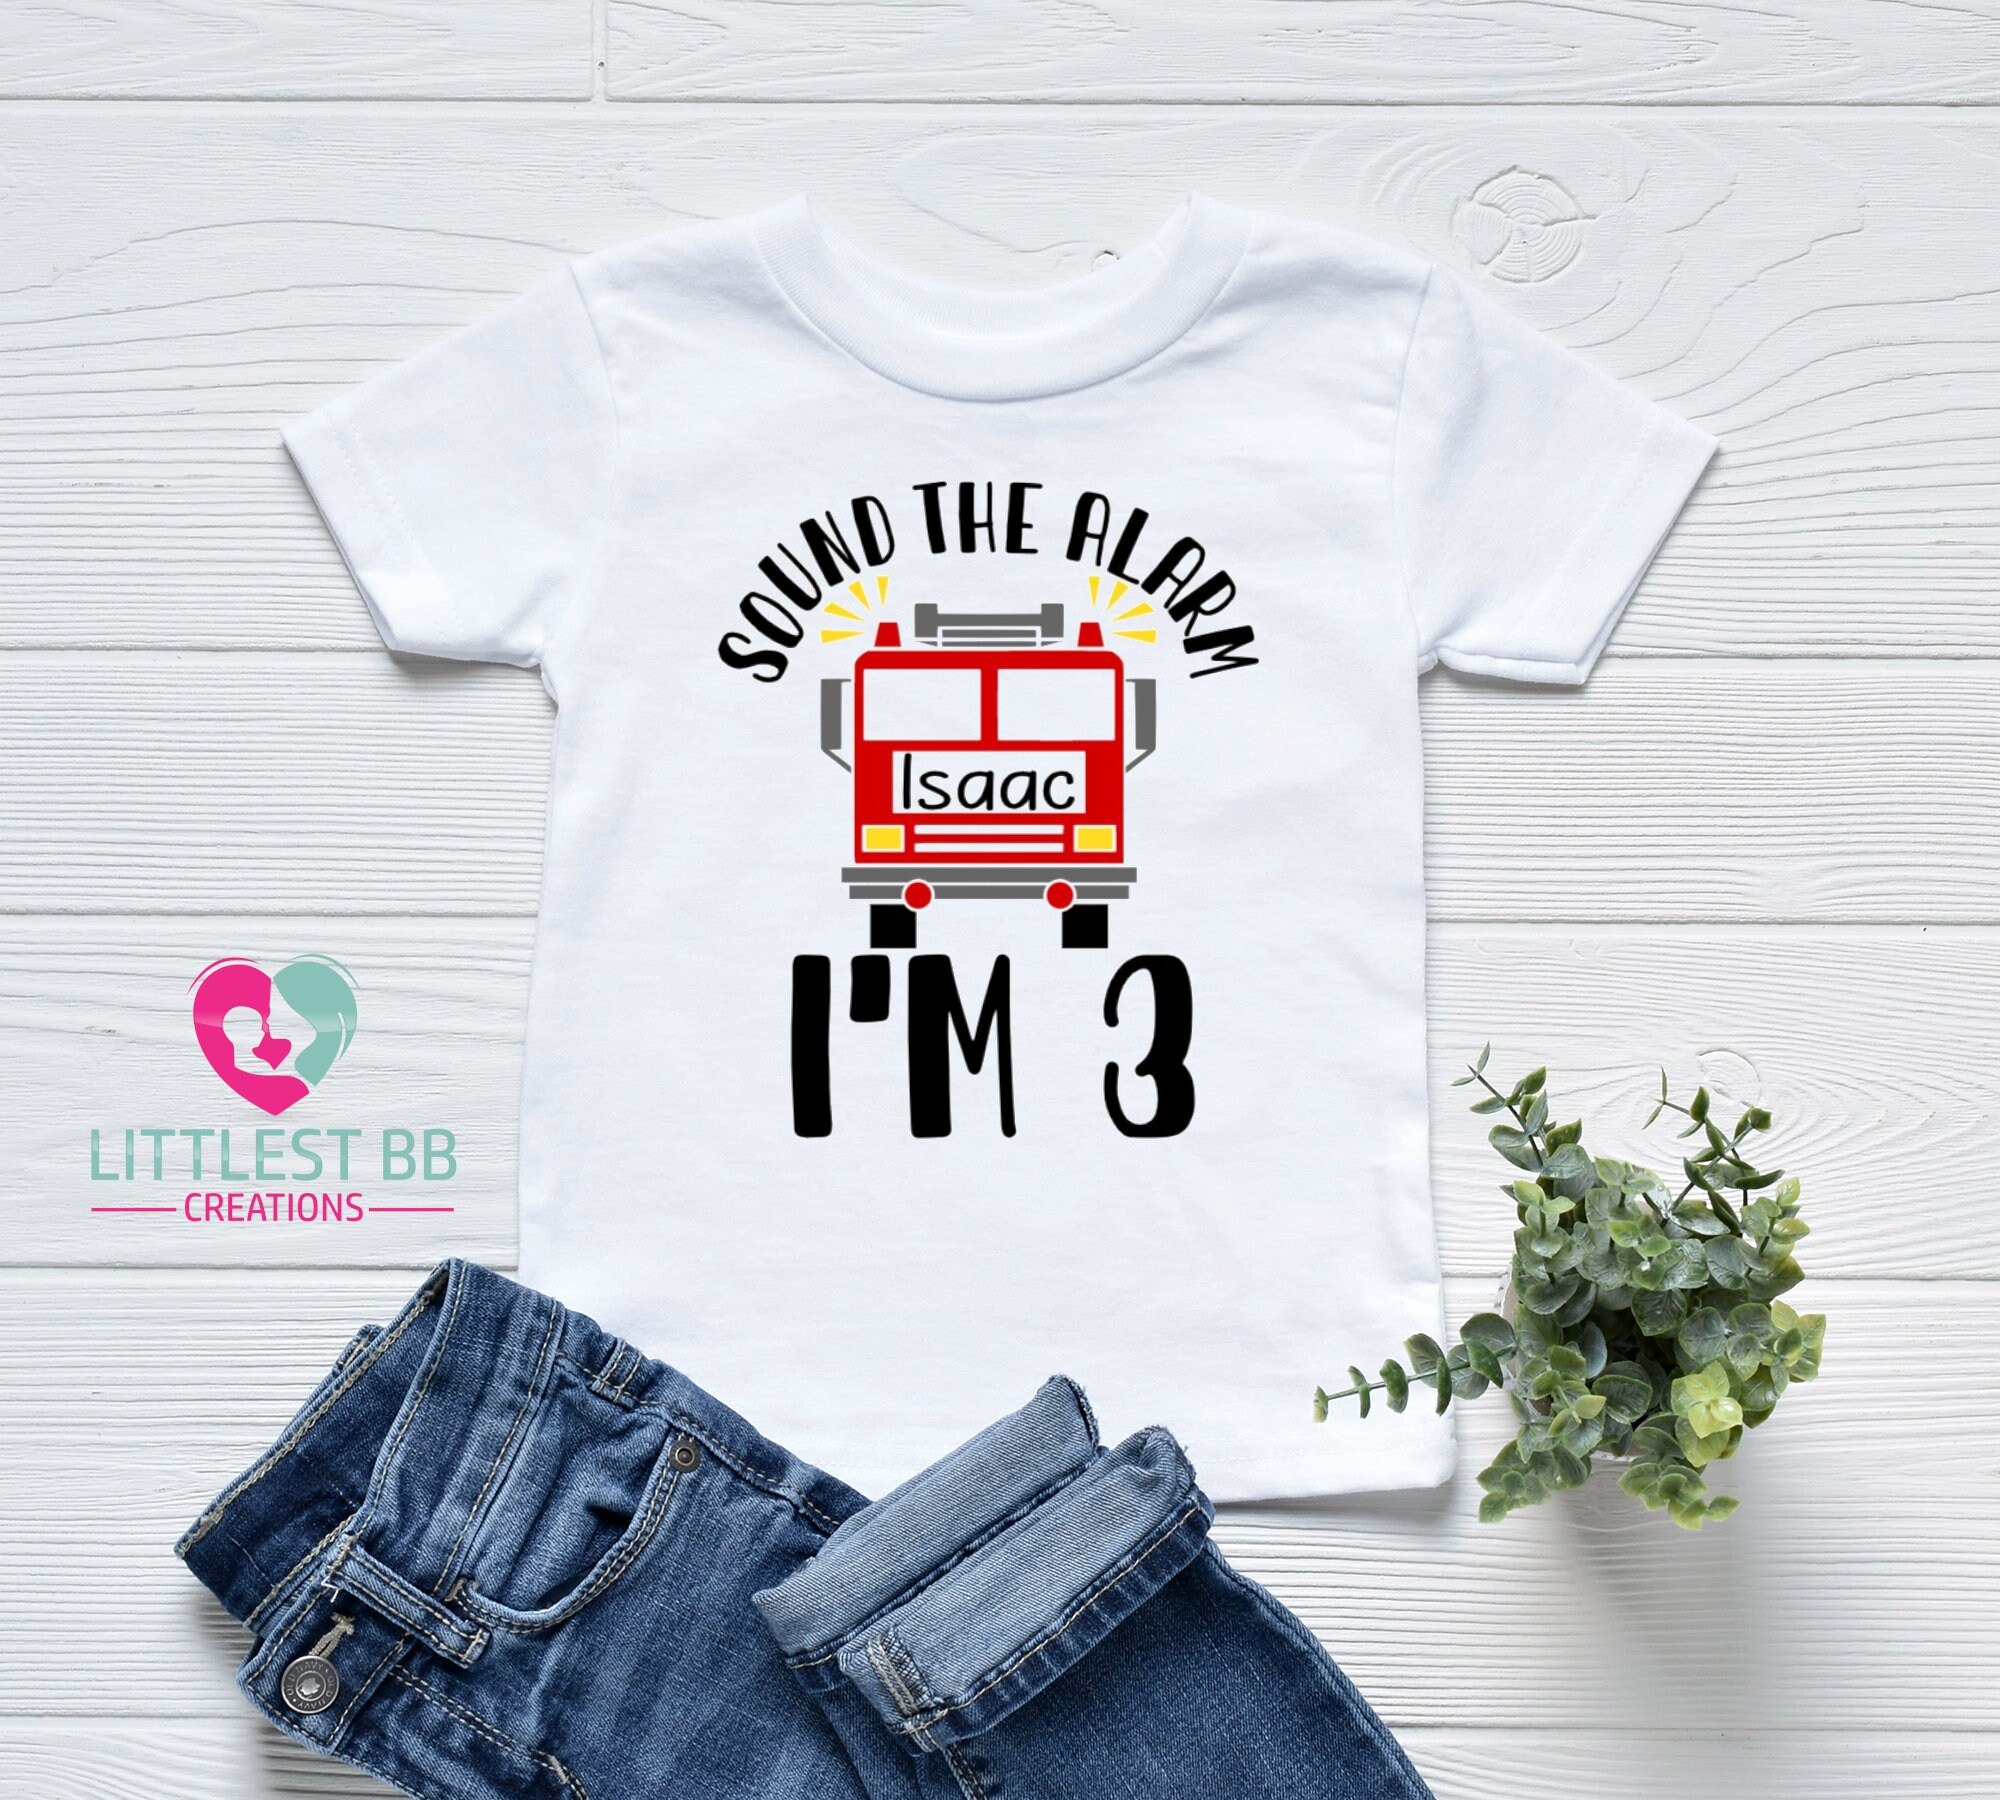 Personalized shirt unisex shirt for kids Choose your text sound the alarm firefighter custom birthday shirt